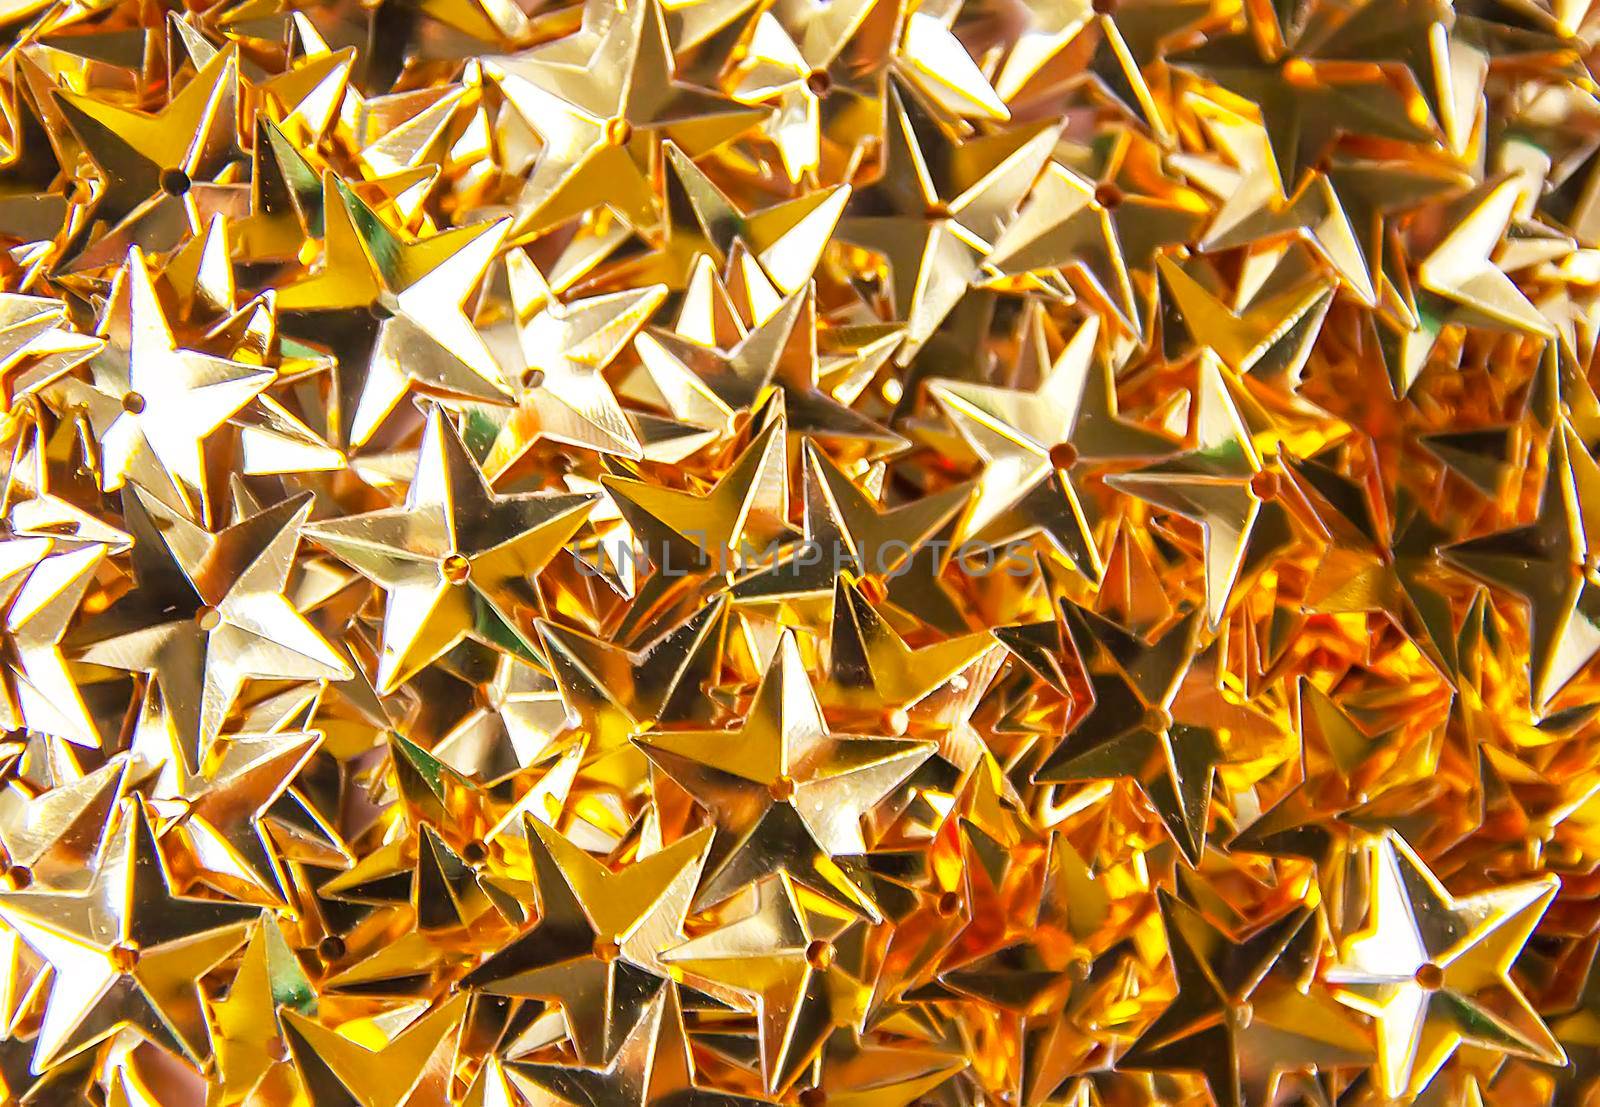 Golden confetti stars festive bright background or Christmas or New Year party decoration